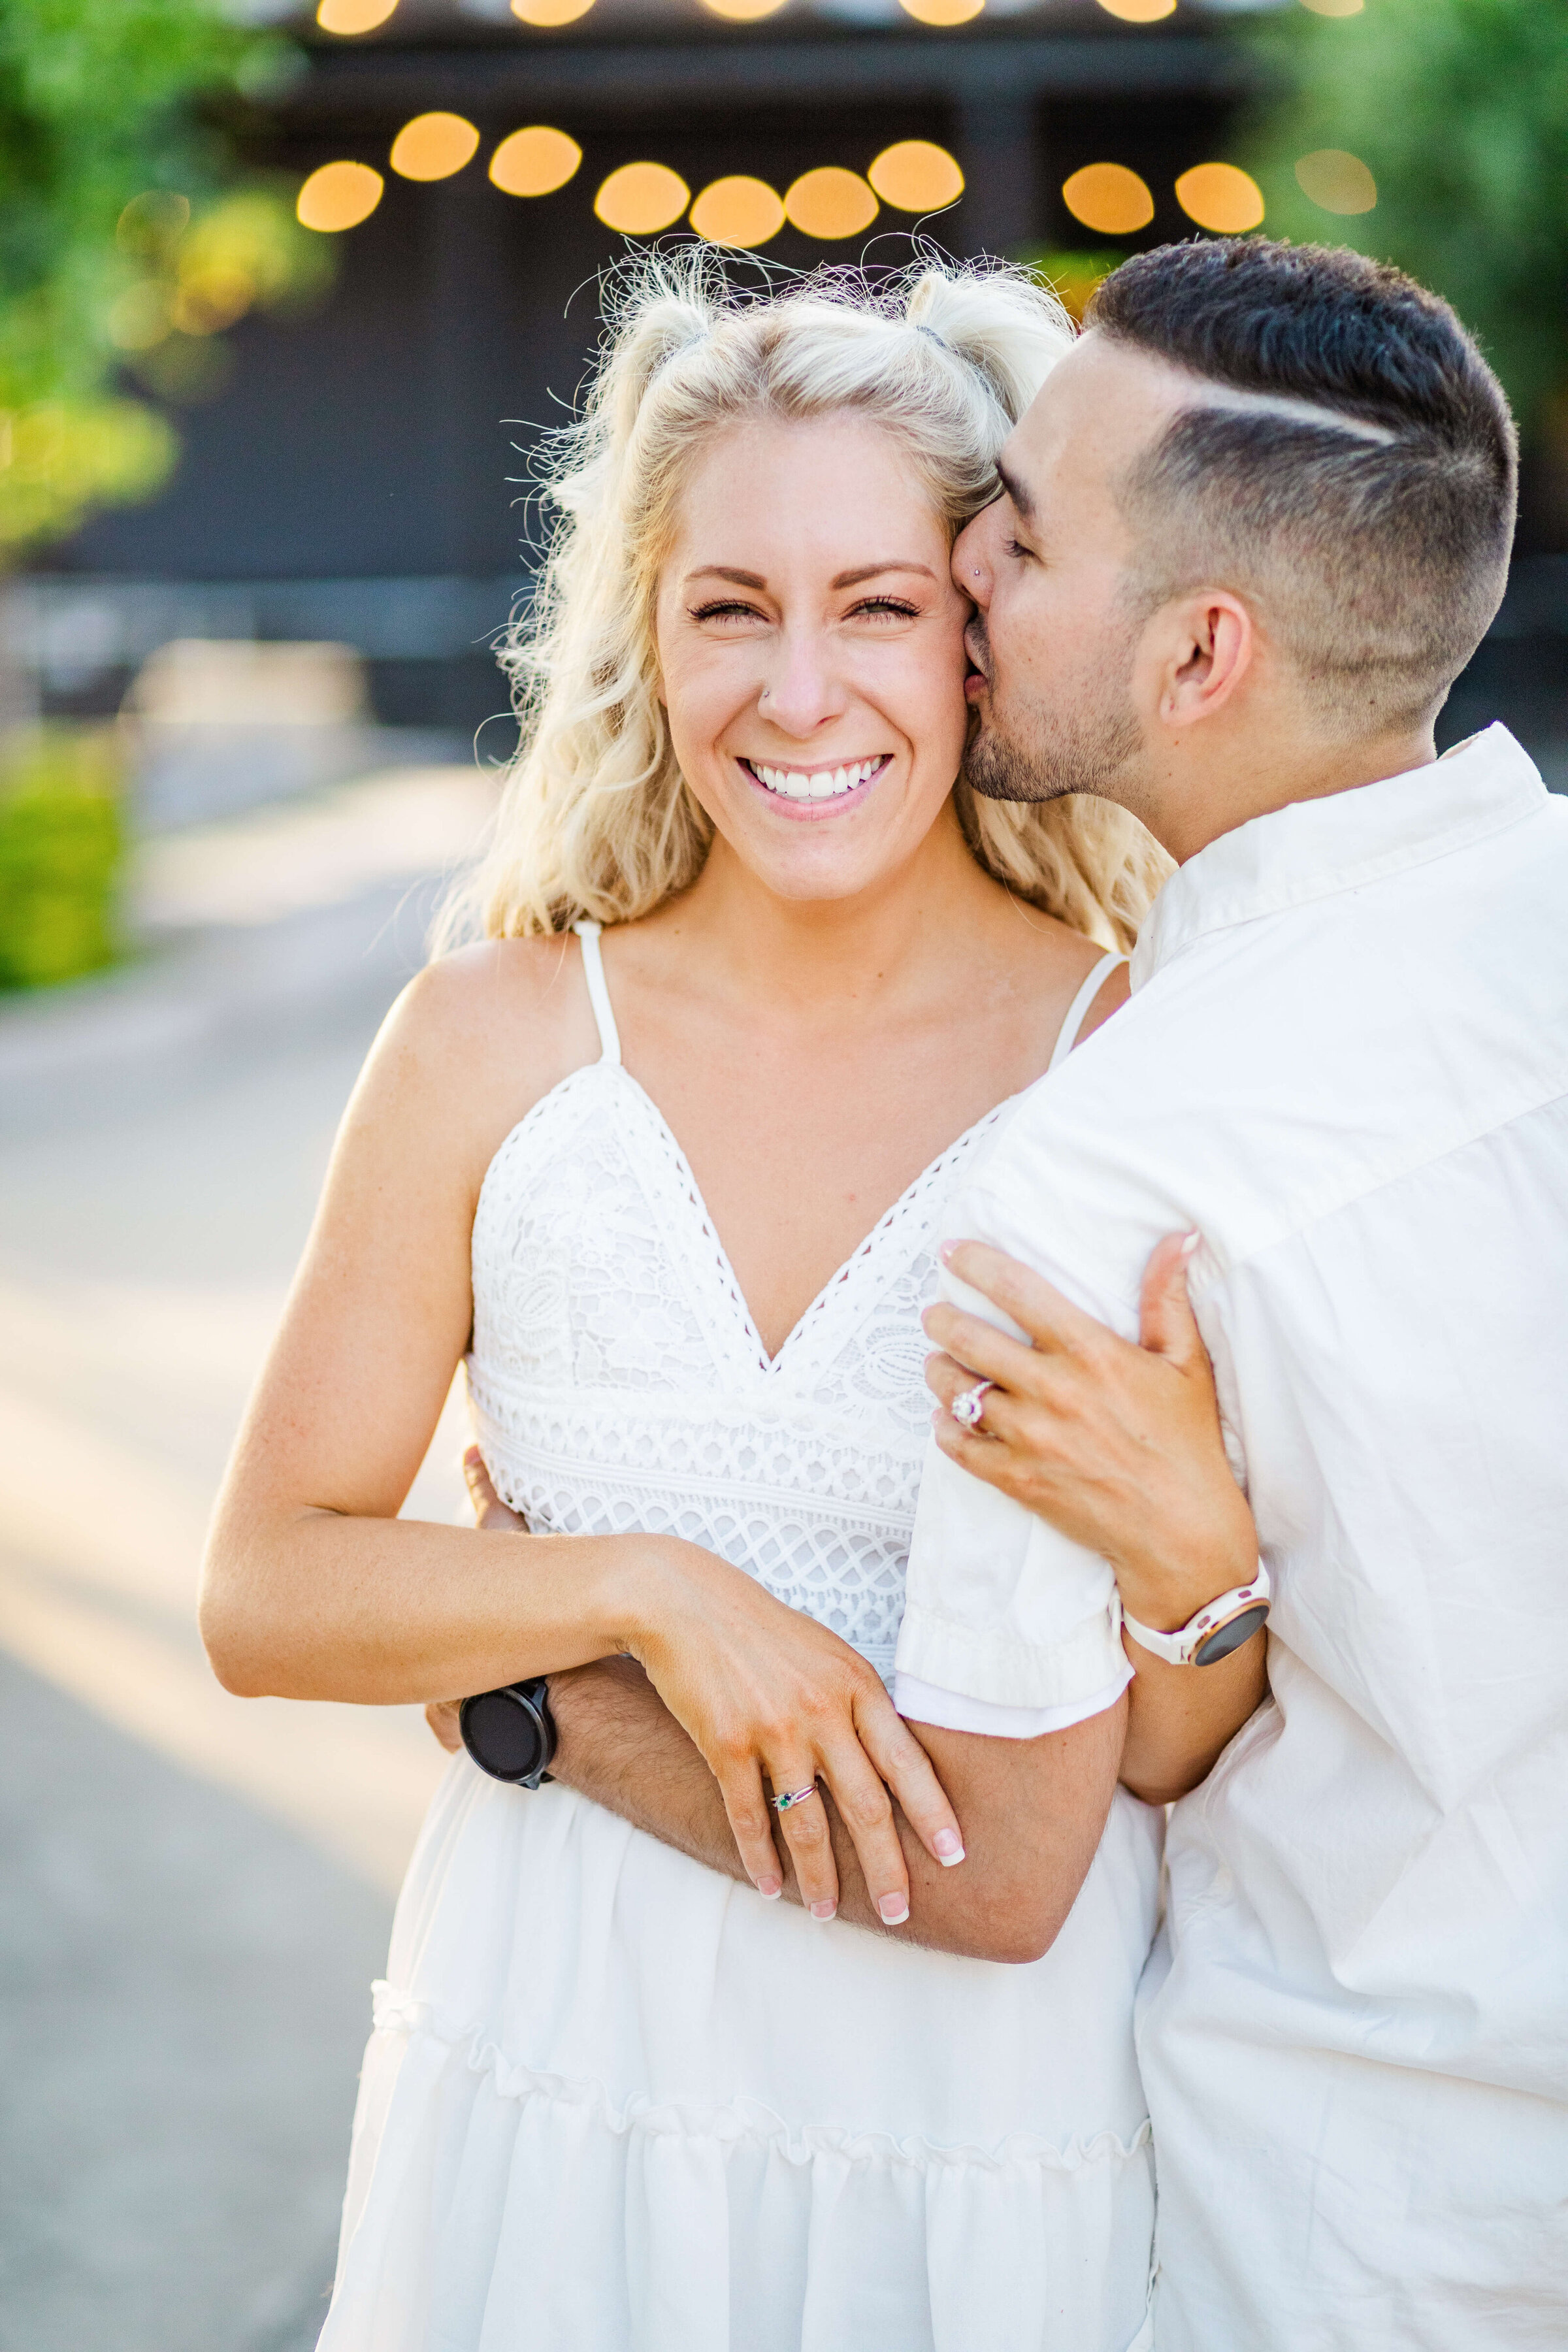 A woman is smiling as her fiance hugs and kisses her on the cheek. They are both wearing white.